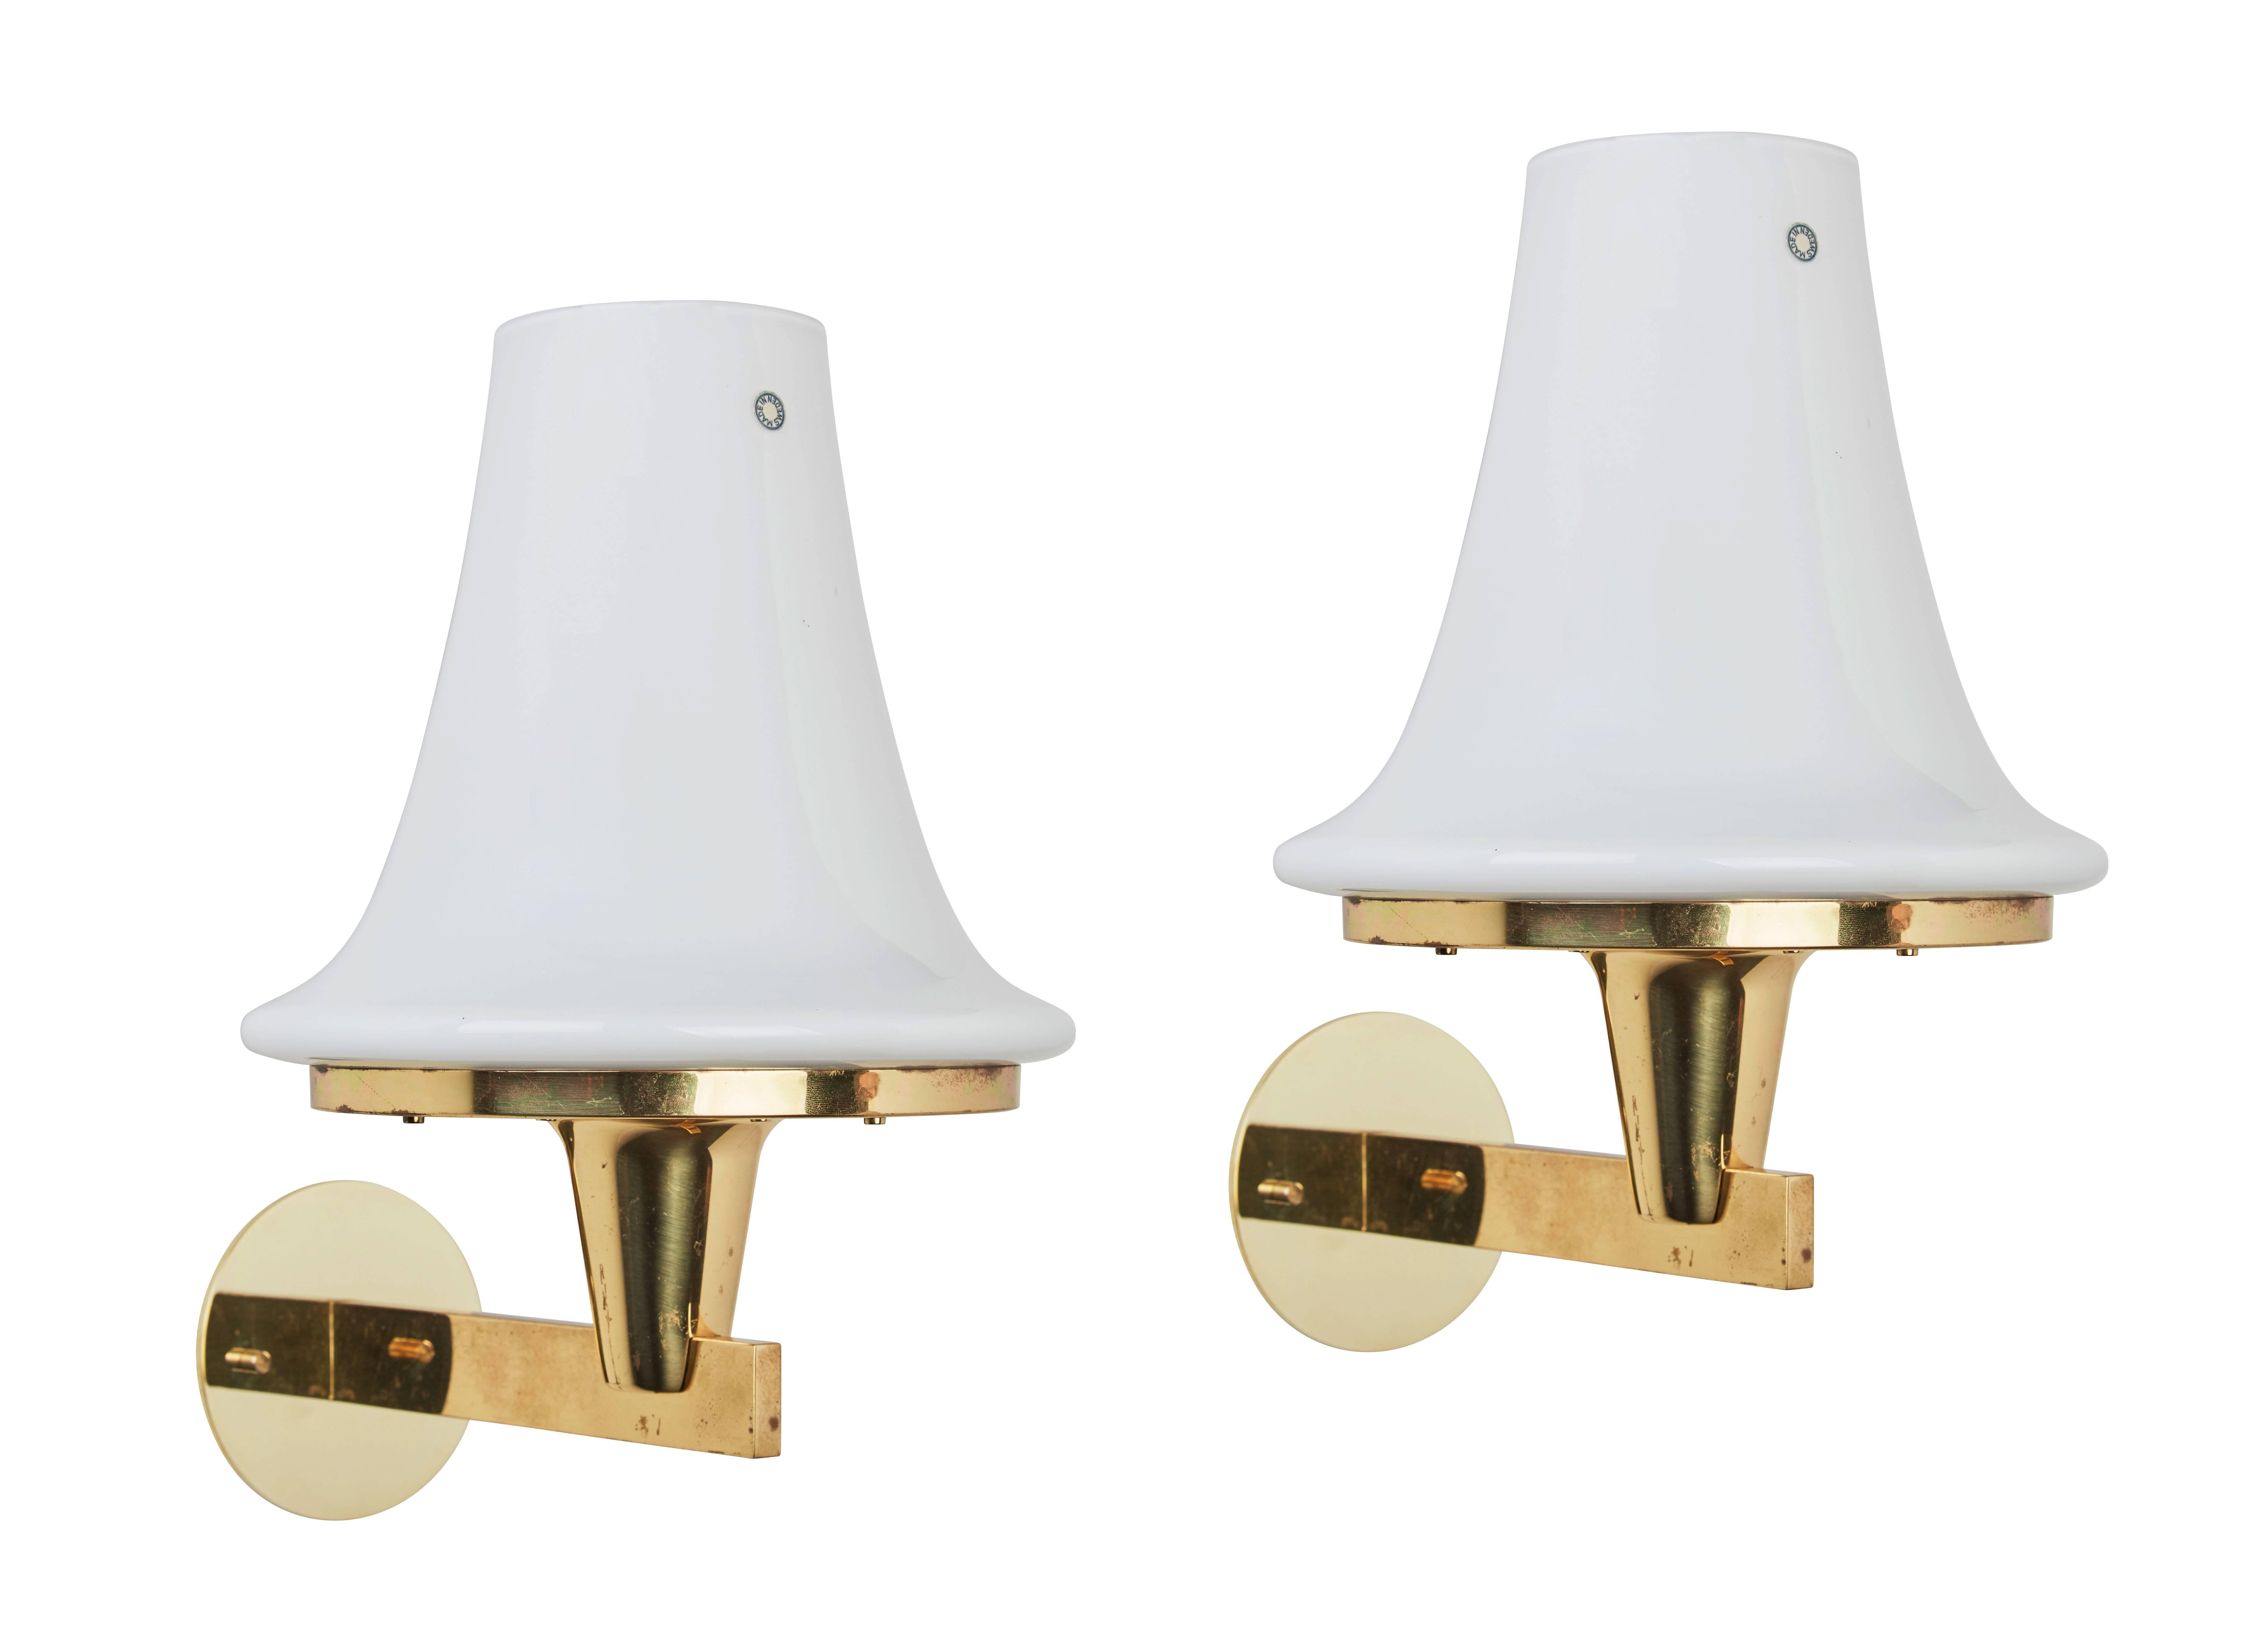 Pair of brass and glass sconces by Hans Agne Jakobsson, Markaryd Sweden, circa 1950s. Wired for US junction boxes. Each sconces takes one E27 75w maximum bulb.